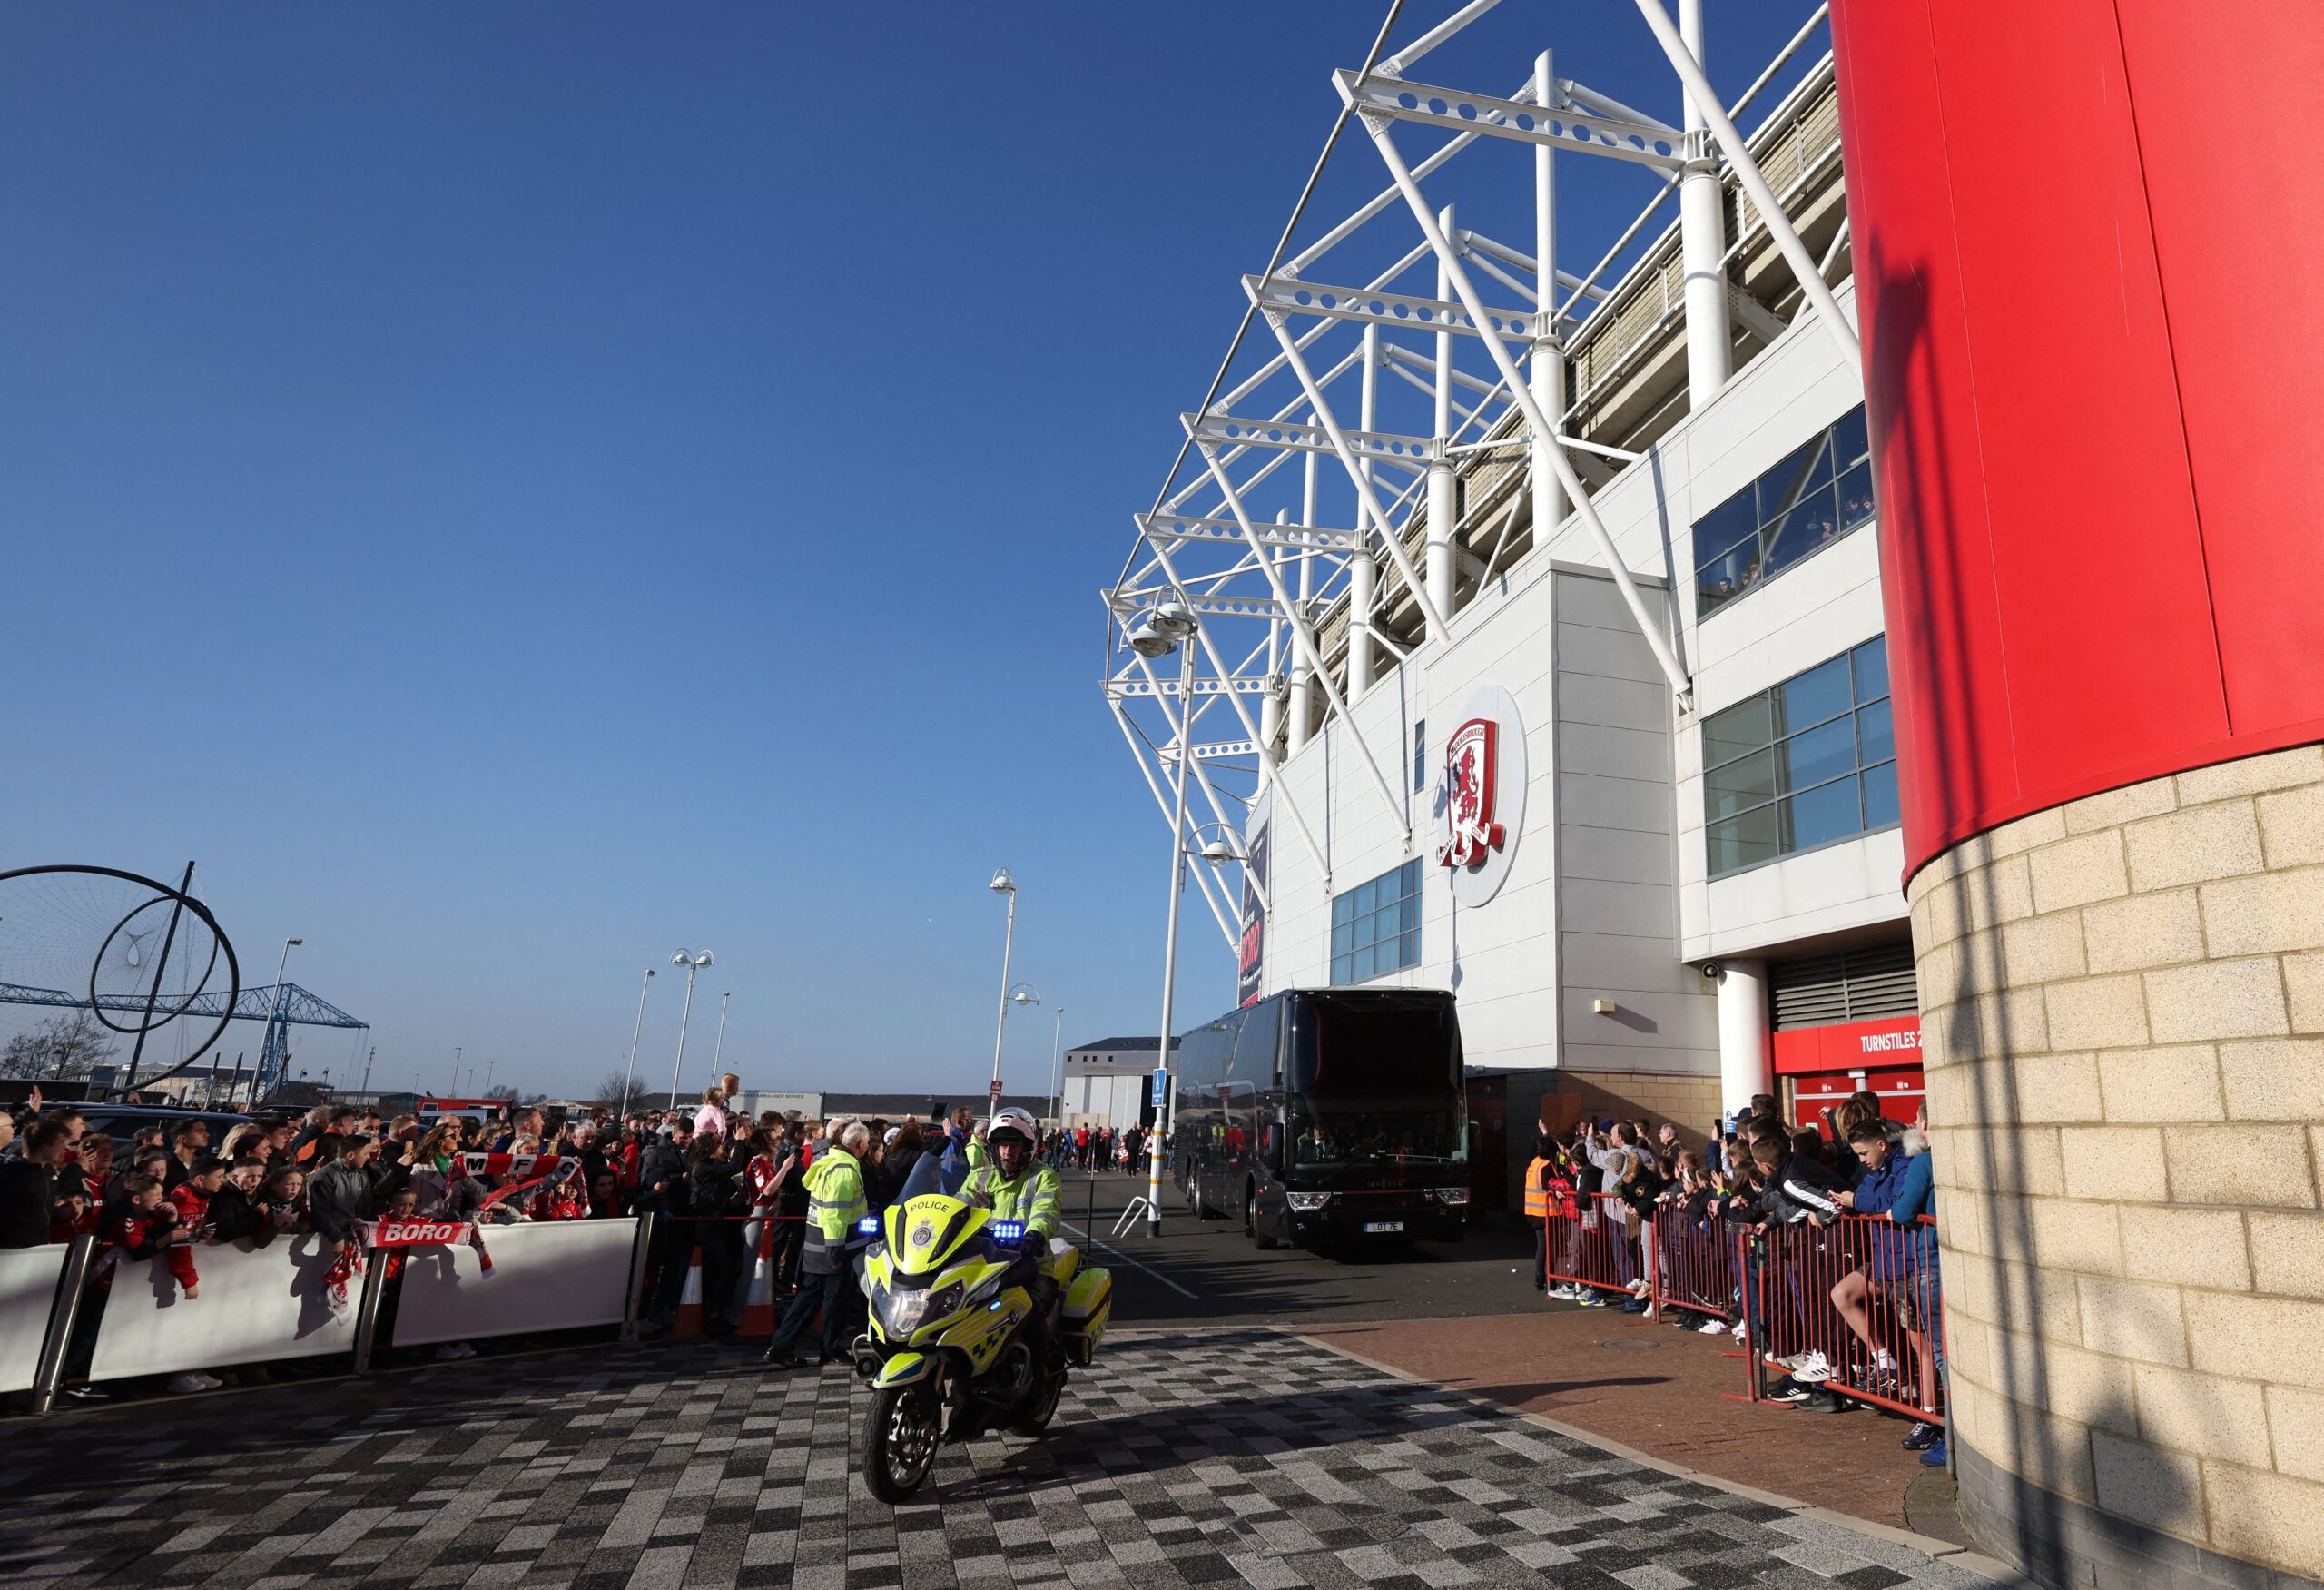 Soccer Football - FA Cup Quarter Final - Middlesbrough v Chelsea - Riverside Stadium, Middlesbrough, Britain - March 19, 2022  General view as the Chelsea team bus arrives at the stadium before the match Action Images via Reuters/Lee Smith